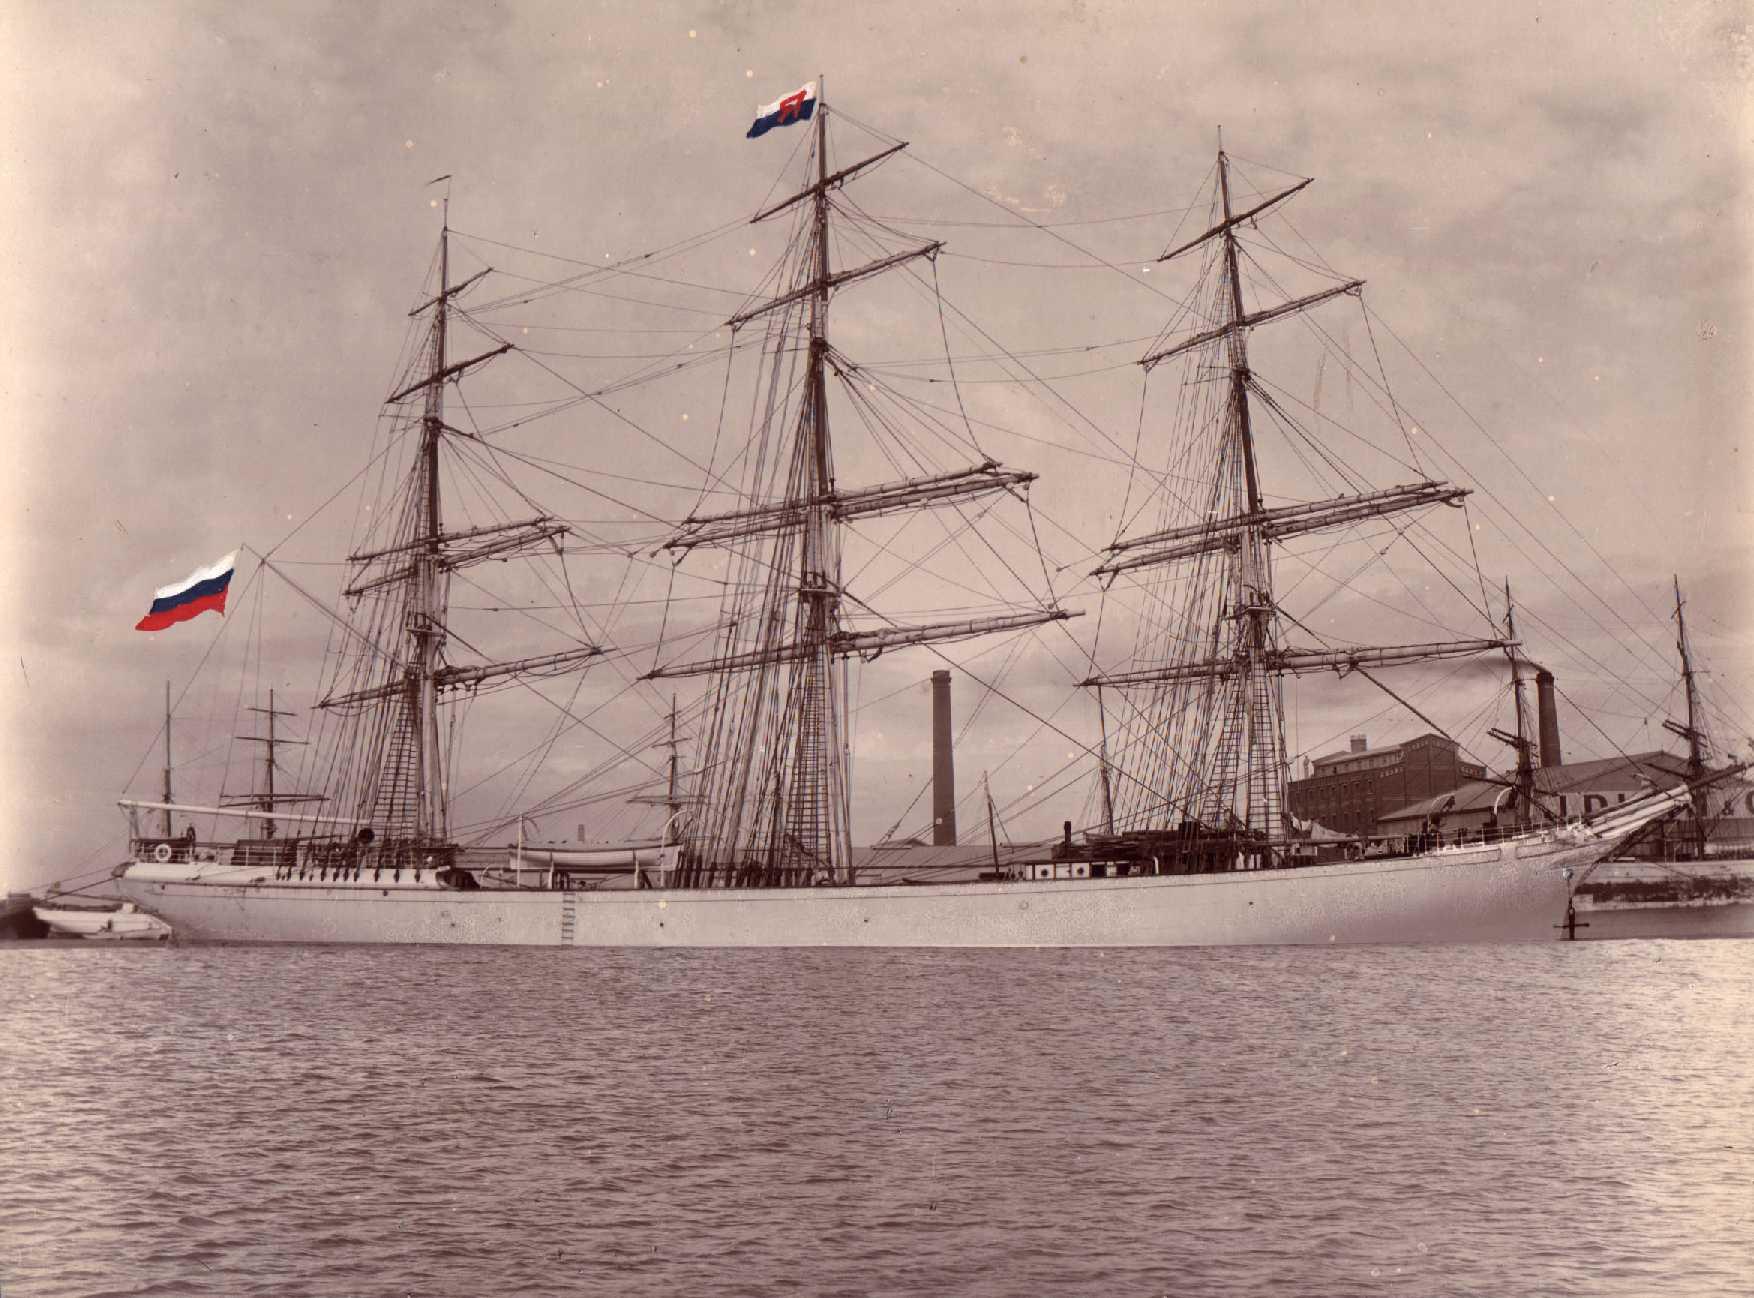 Barque, "Yarkand", built in 1877 at Barrow by Barrow Shipbuilding Co.  Owned by  E Bates & Sons.
Official Number:  76483
Tonnage:  1352 gross
Dimensions:  length 222', breadth 37', draught 22'
Port Of Registry:  Liverpool